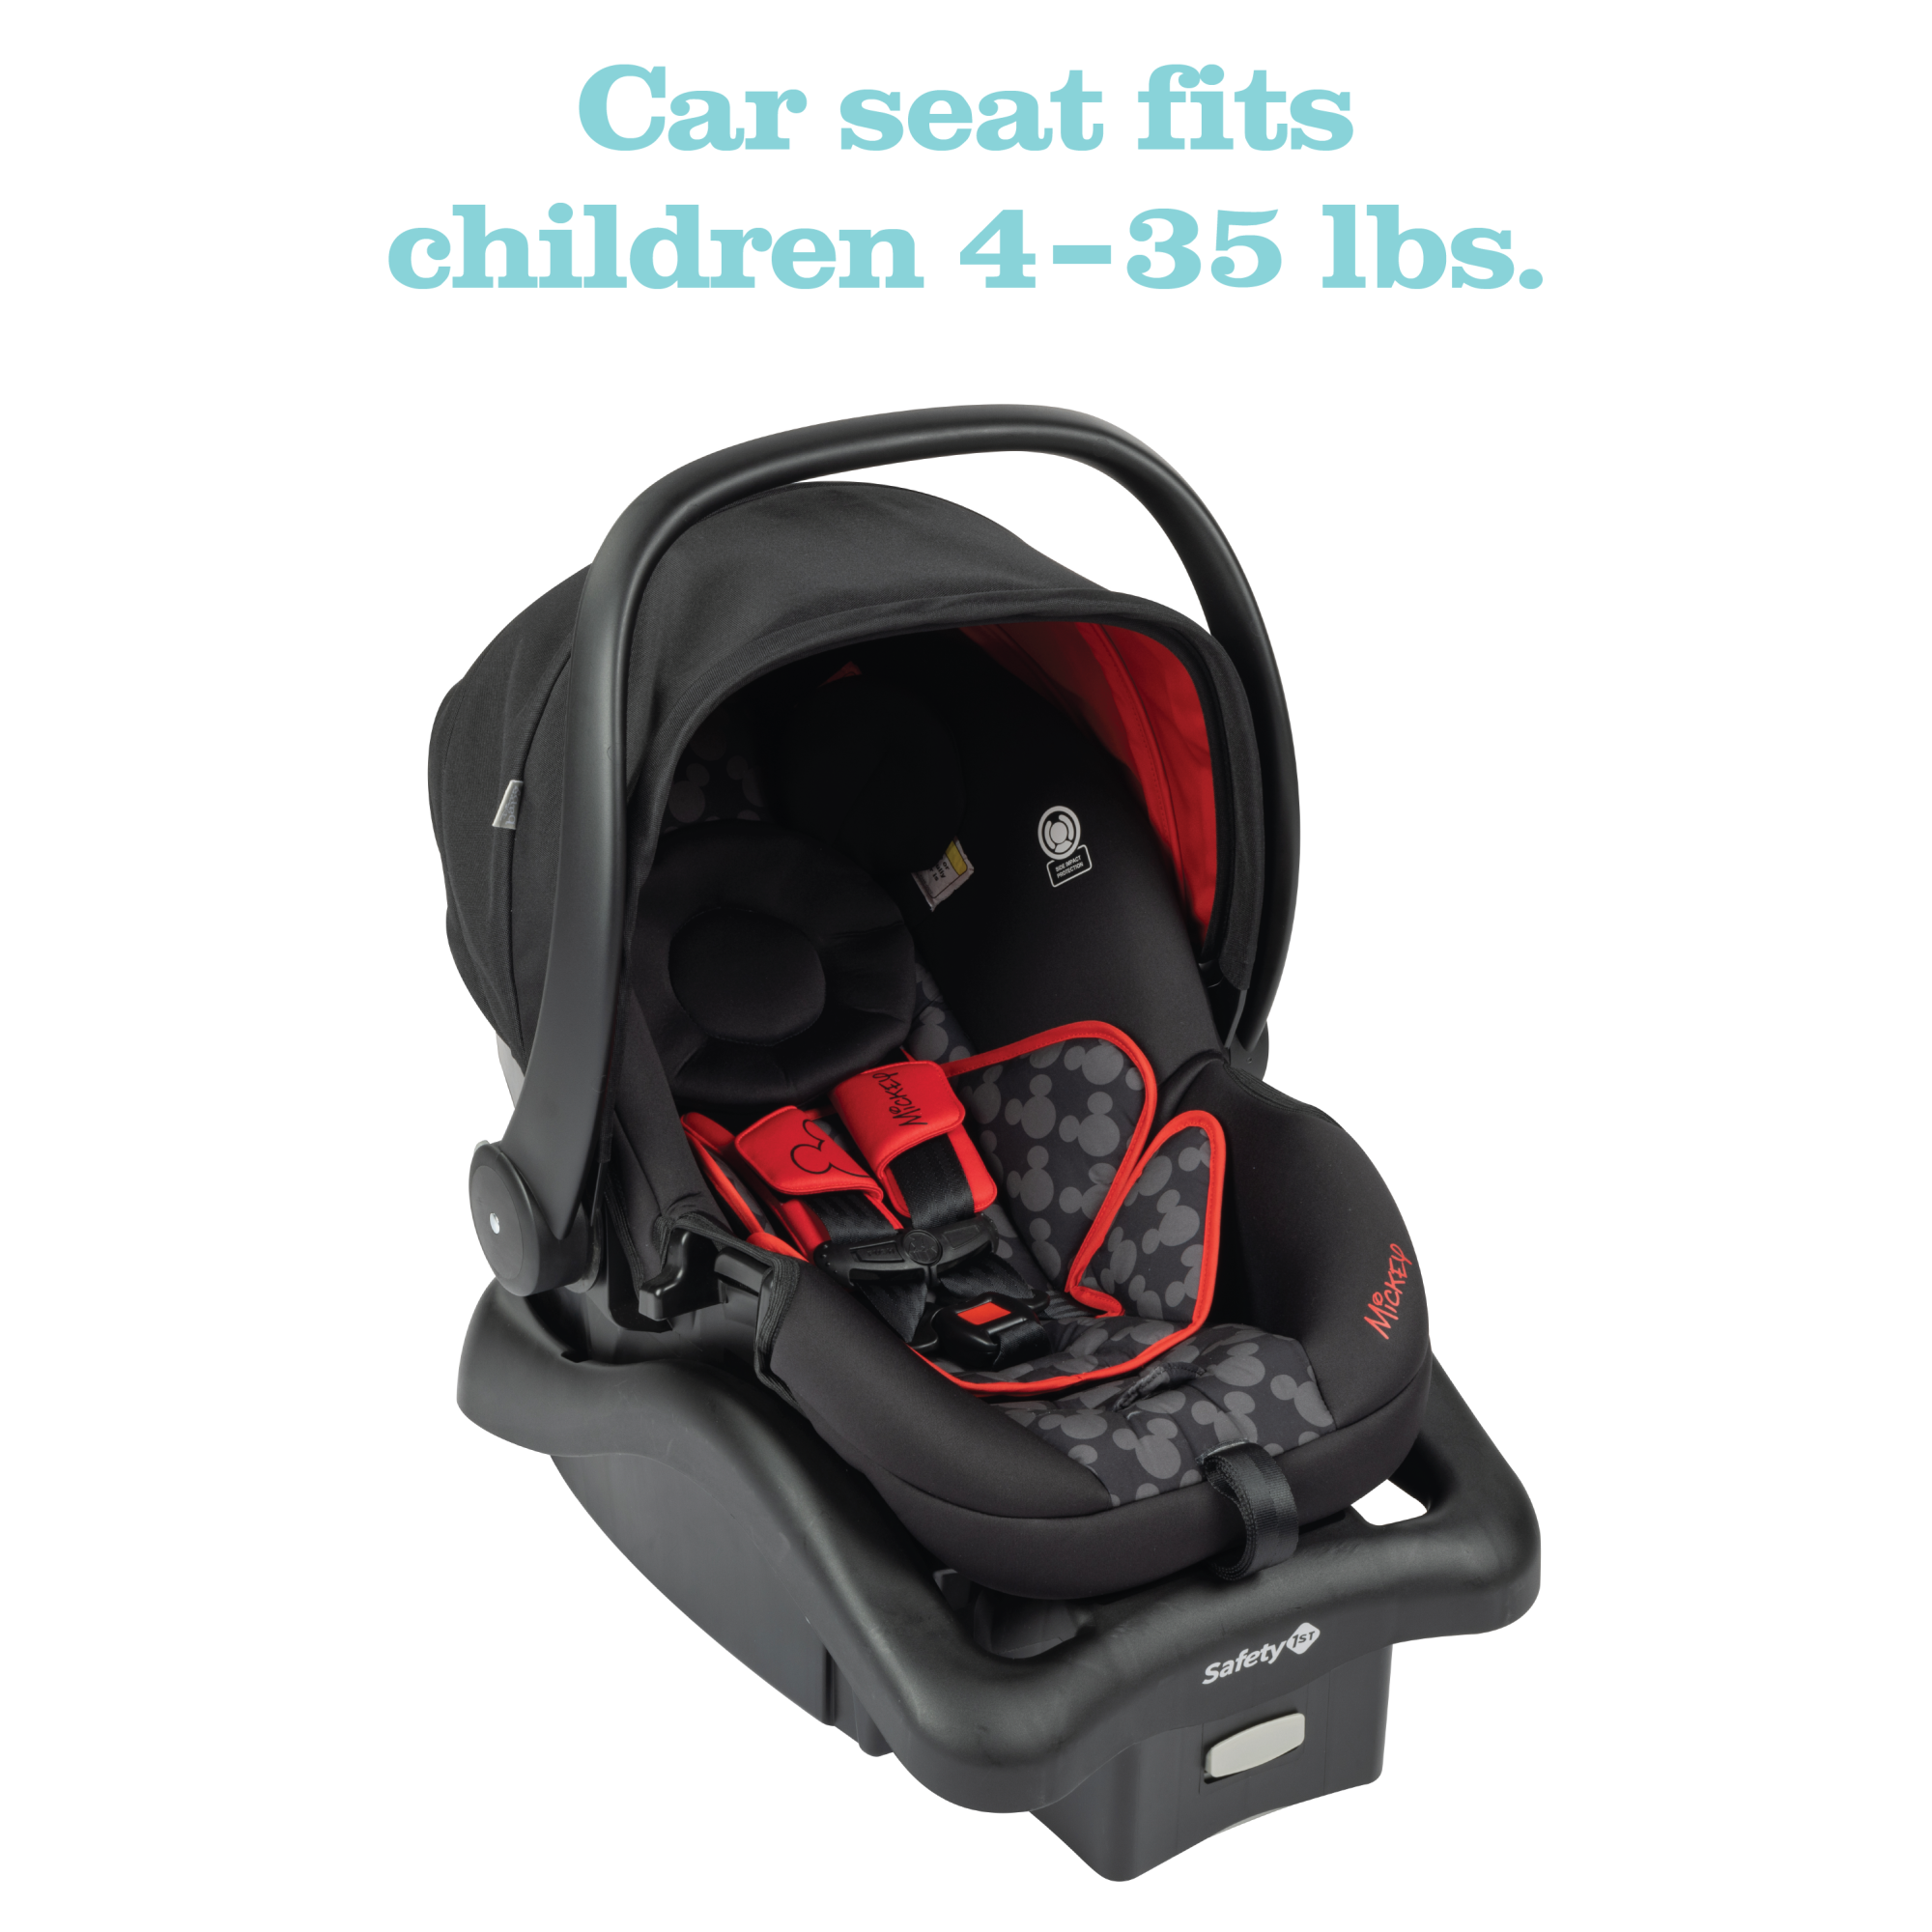 Disney Baby Grow and Go™ Modular Travel System - car seat fits children 4-35 lbs.